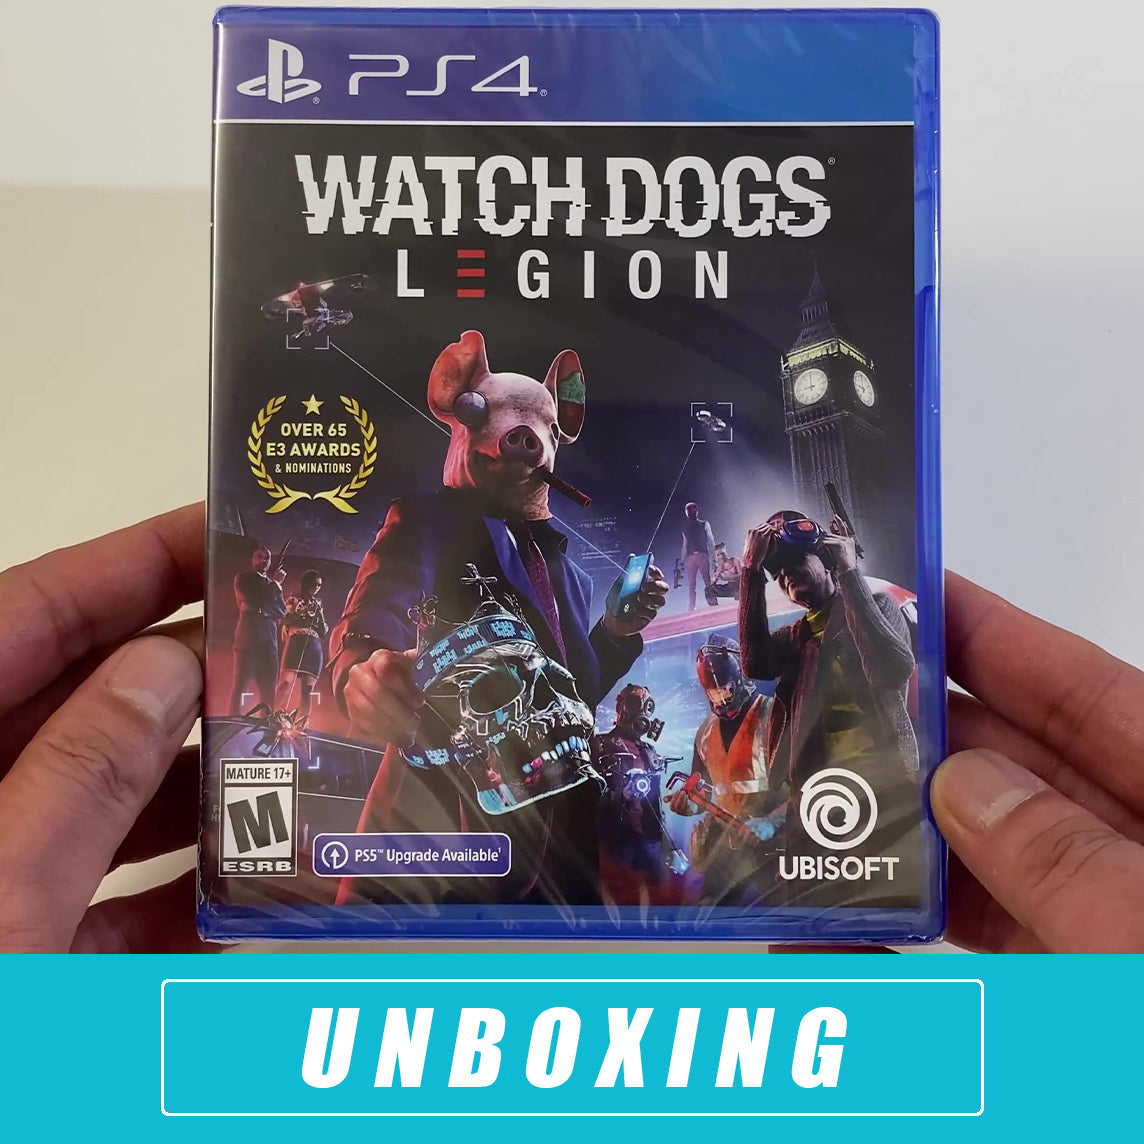 [UNBOXING] 4 Game PlayStation J&L - Dogs | Legion (PS4) Watch